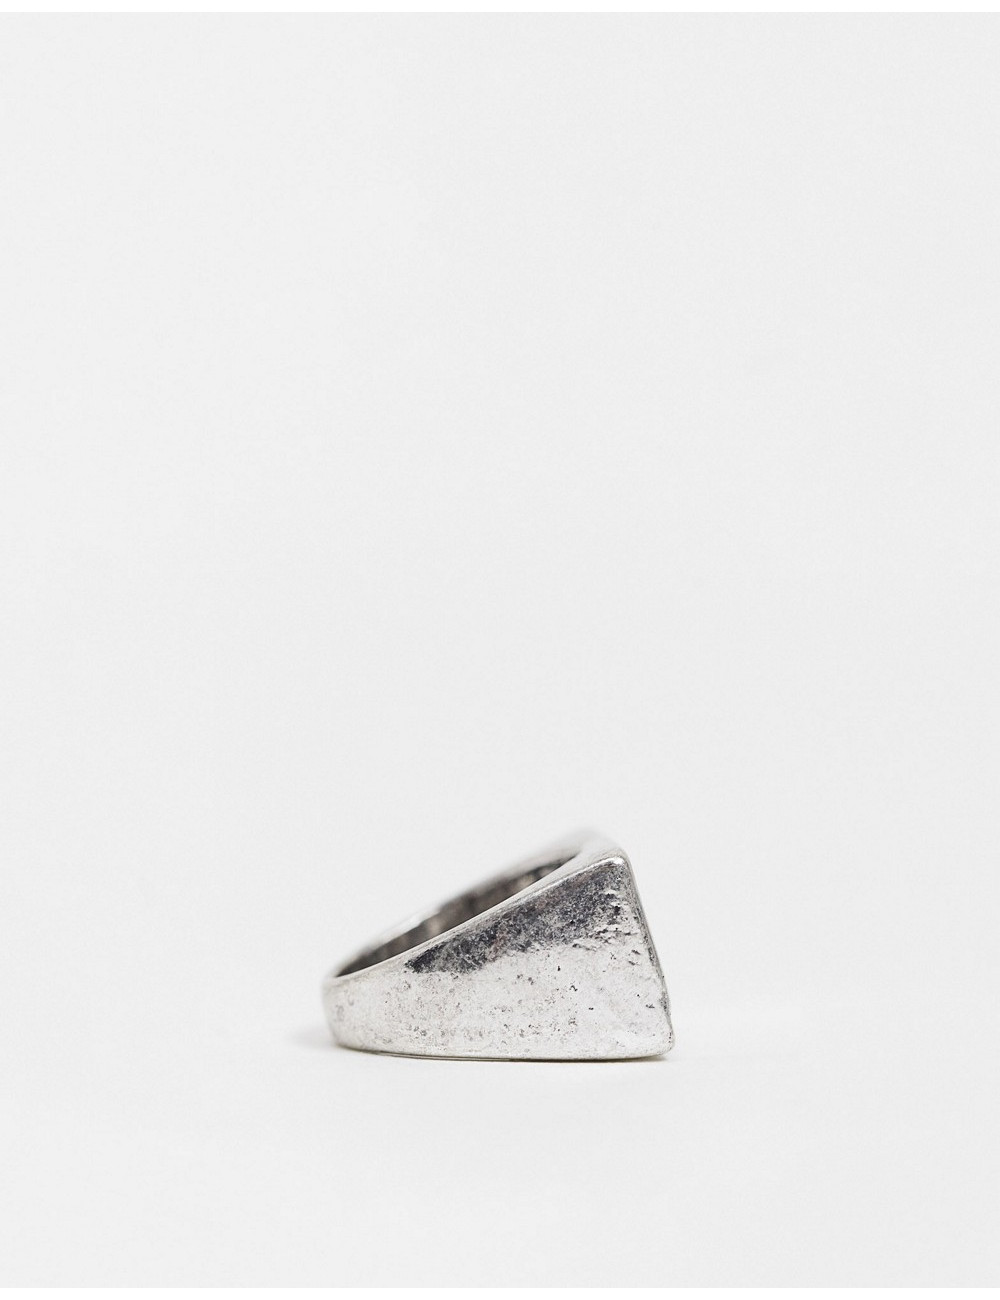 ASOS DESIGN ring with Angel...